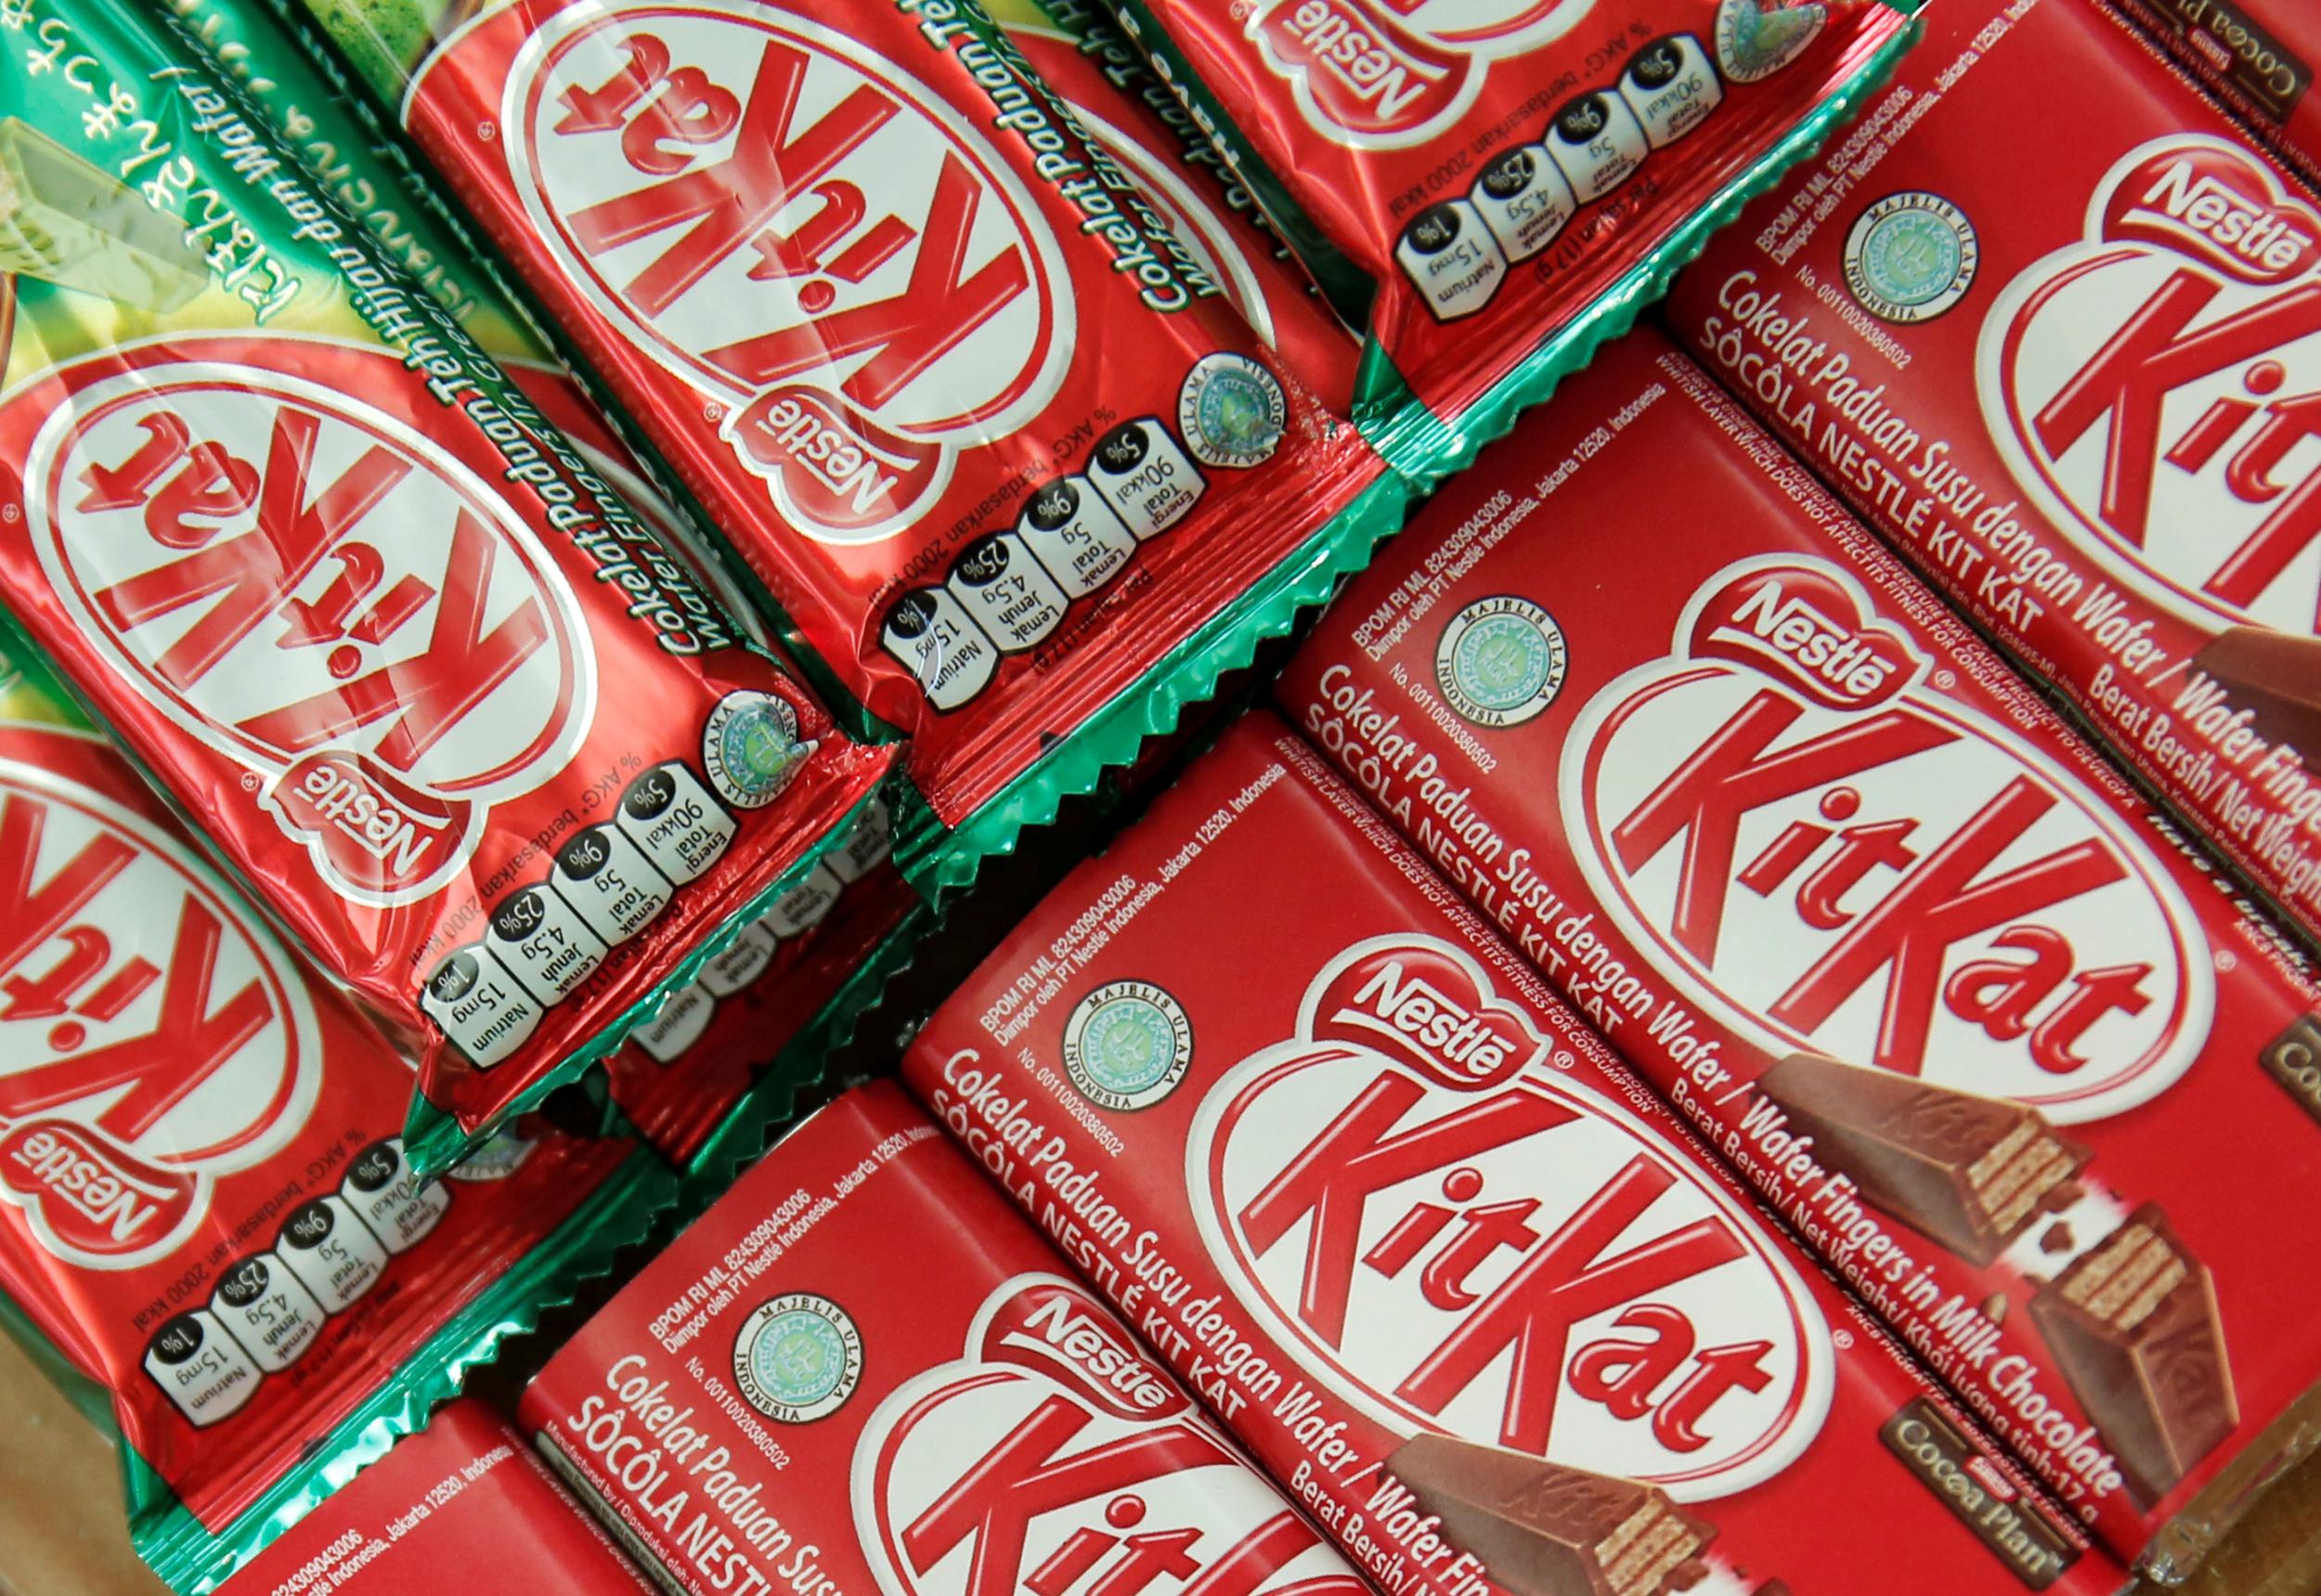 The KitKat maker has spent £77m this year on restructuring